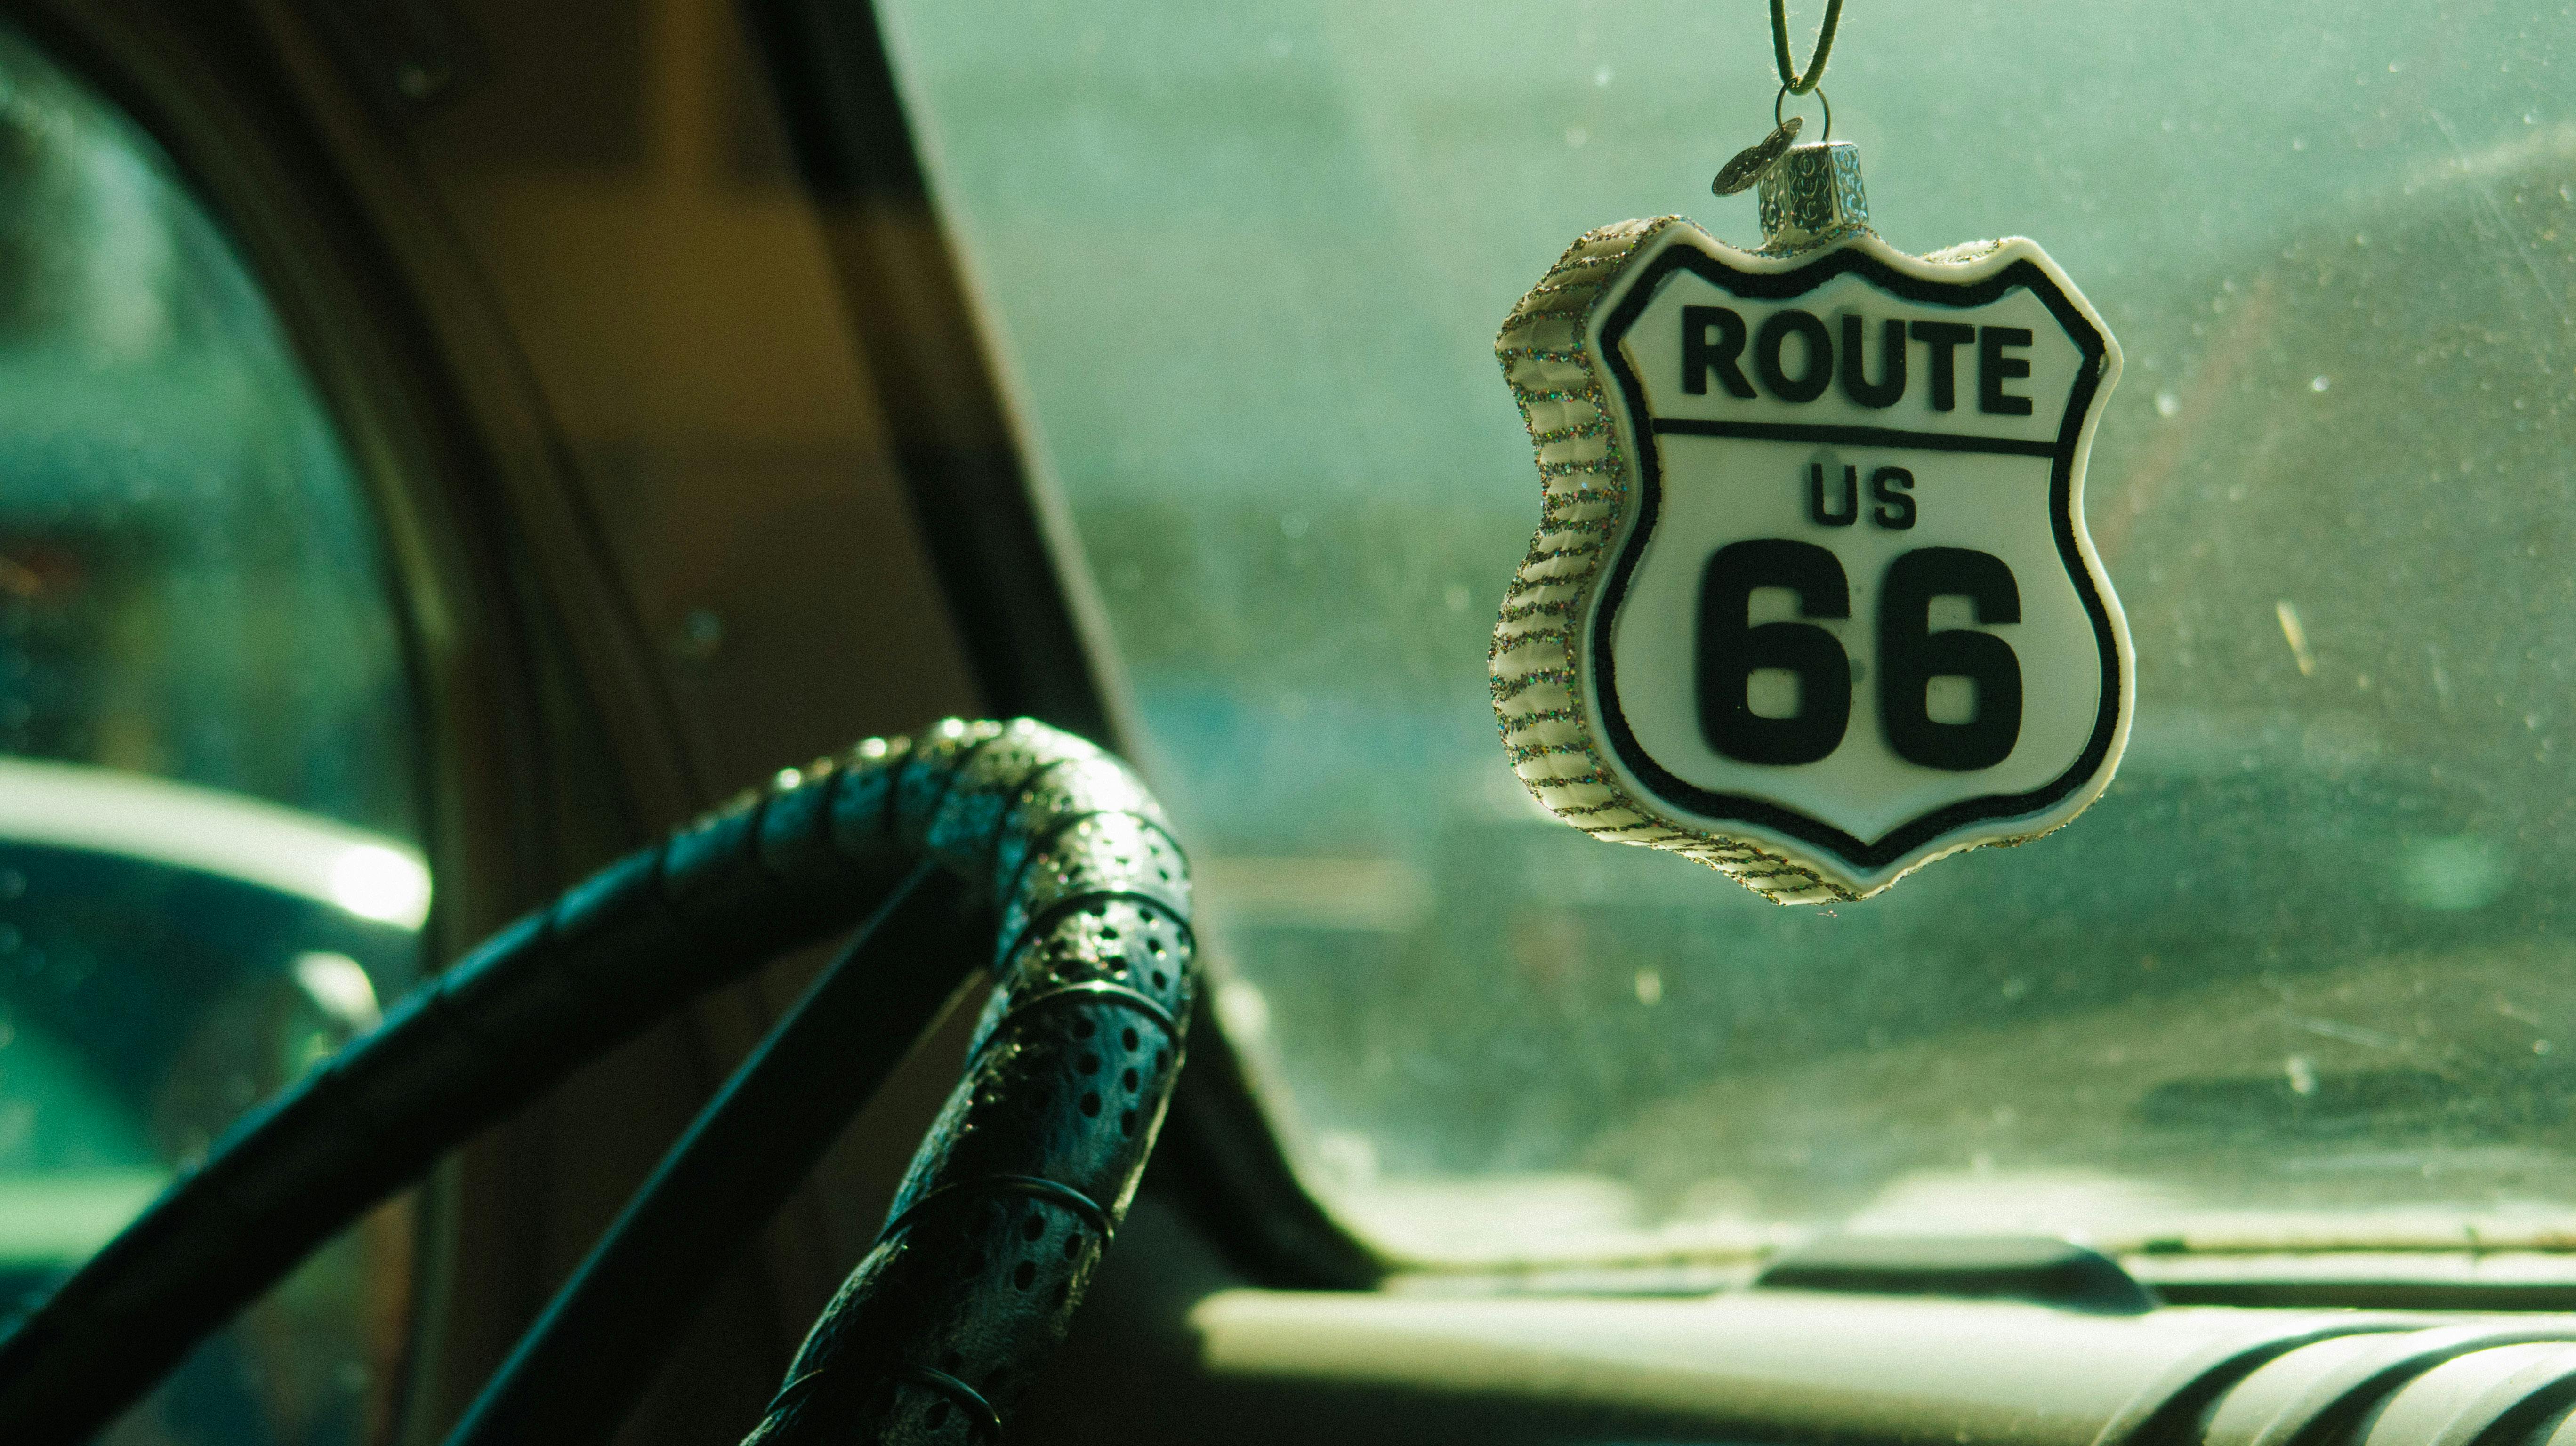 Route 66 picture wallpaper  American highway wallpaper  poster XXL wall  decoration GREAT ART 827 Inch x 55 Inch  Amazonin Home Improvement